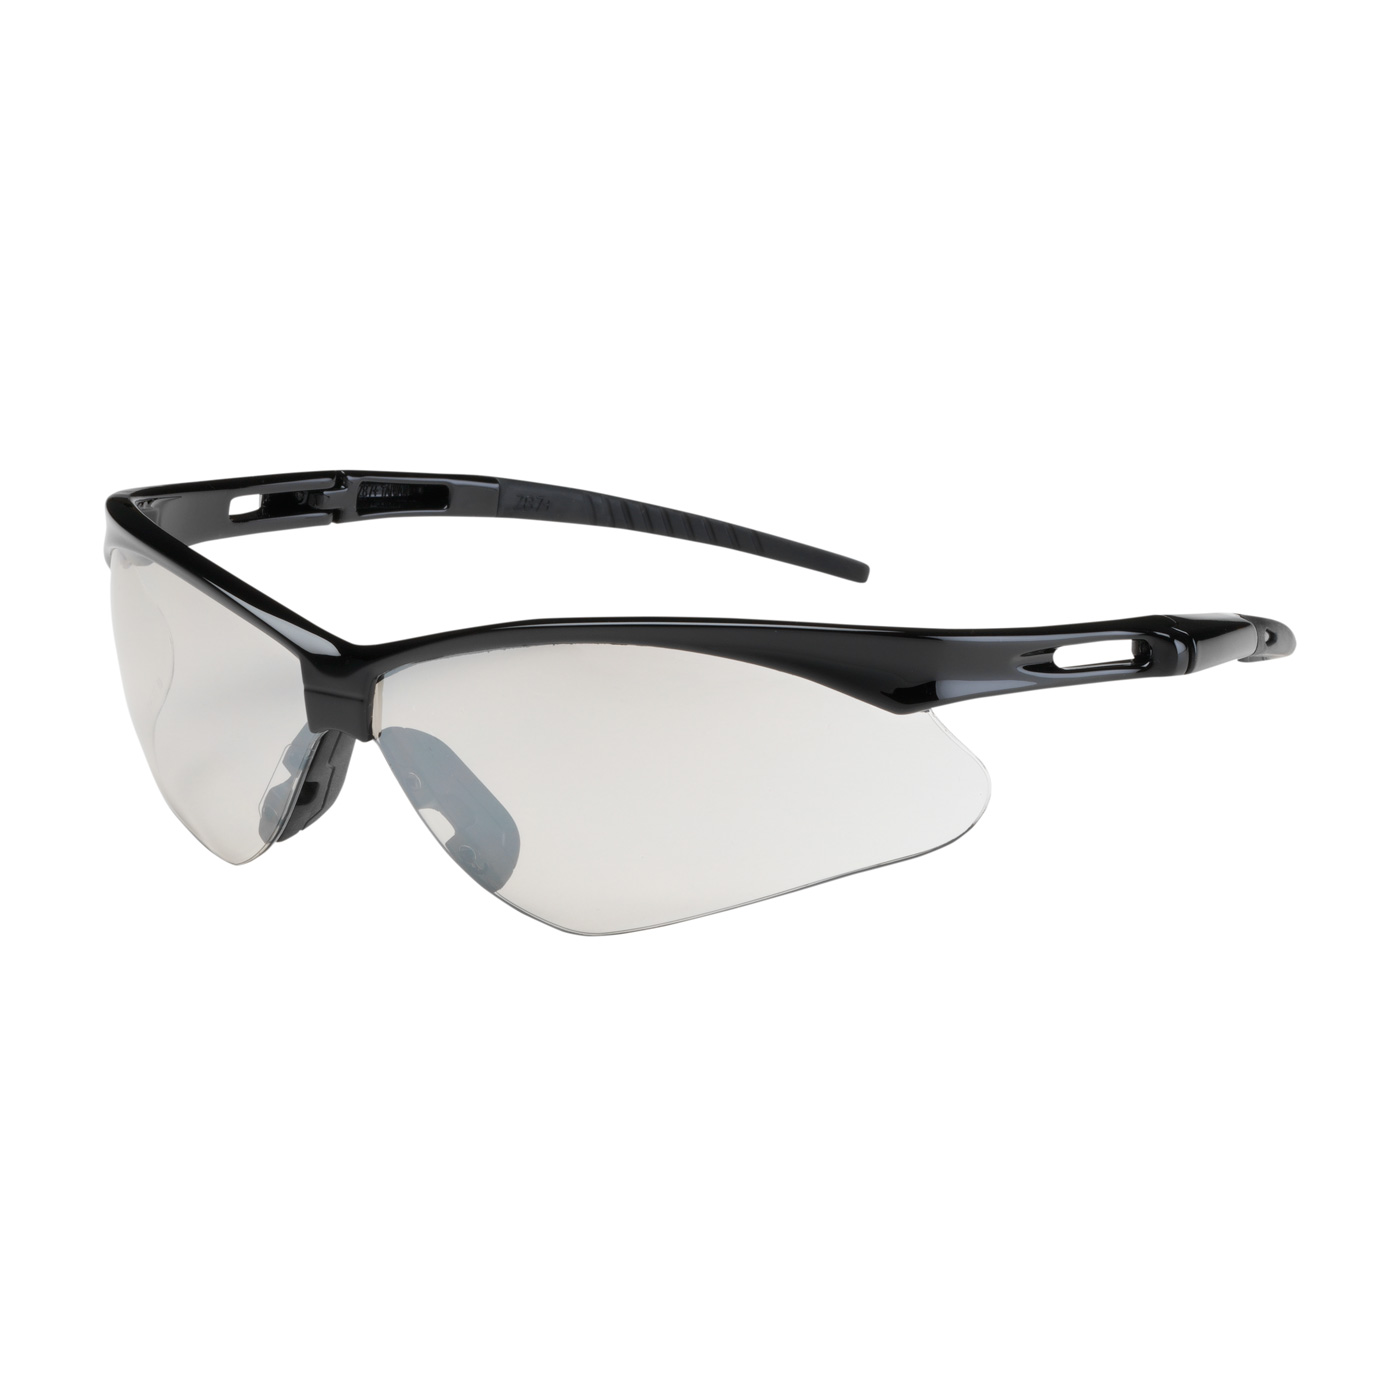 PIP 250-AN-10114 Anser Semi-Rimless Safety Glasses with Black Frame, I/O Lens and Anti-Scratch Coating PID-250 AN 10114